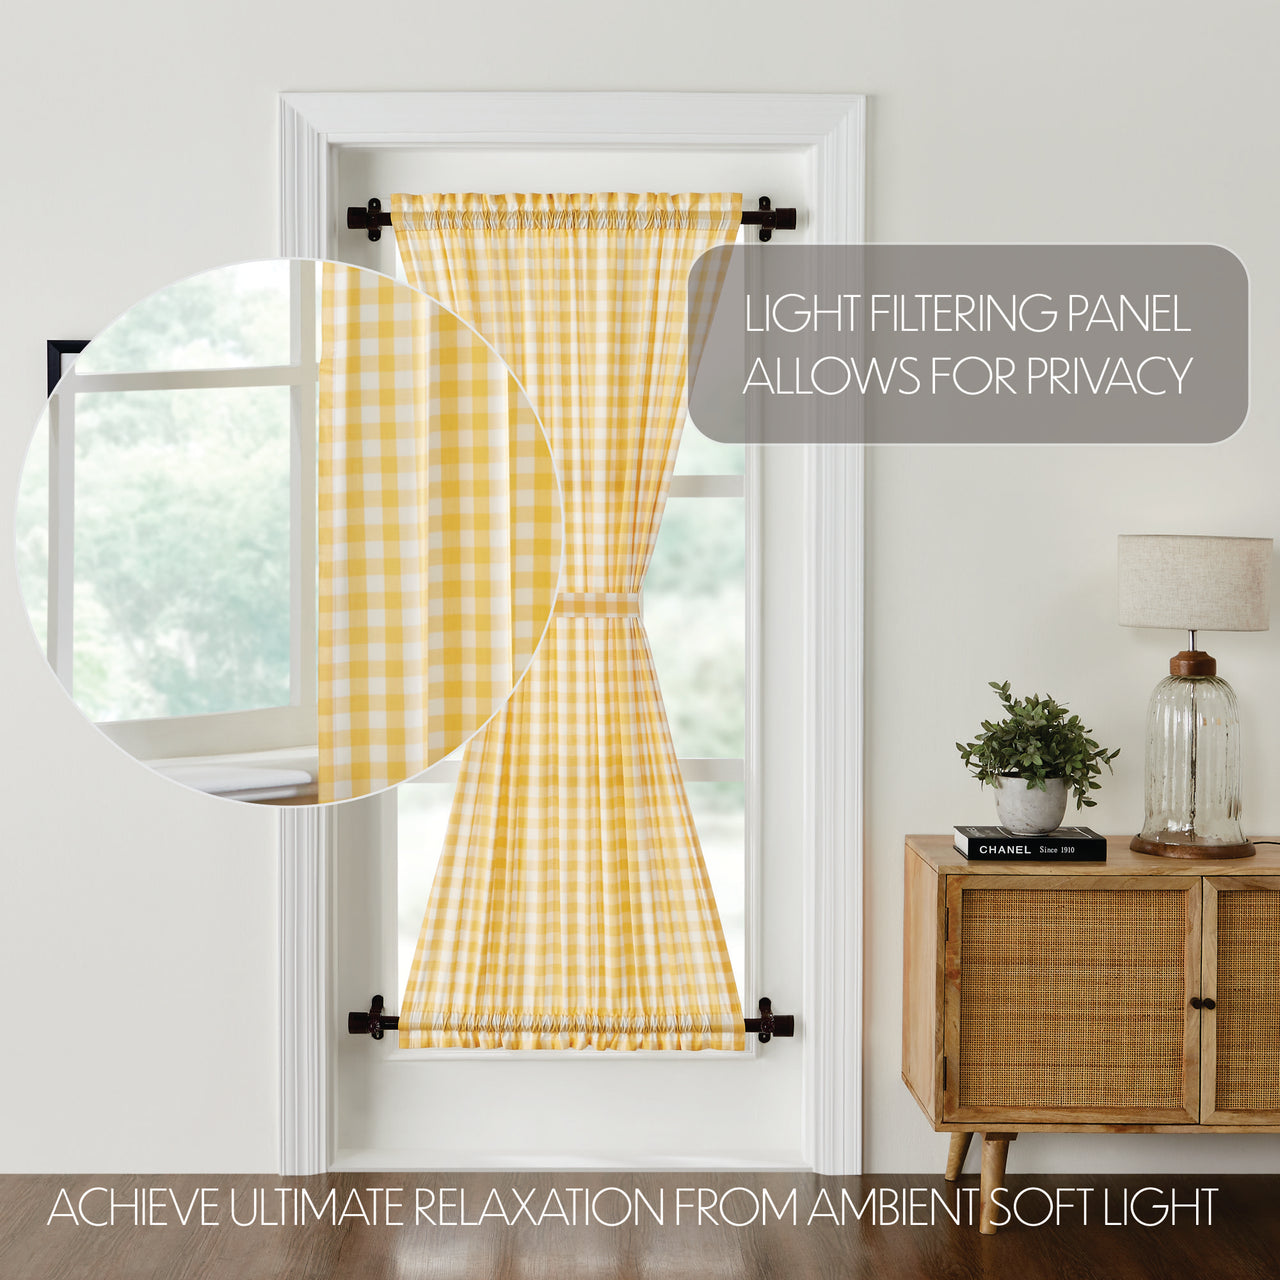 Annie Buffalo Yellow Check Door Panel Curtain 72"x40" VHC Brands